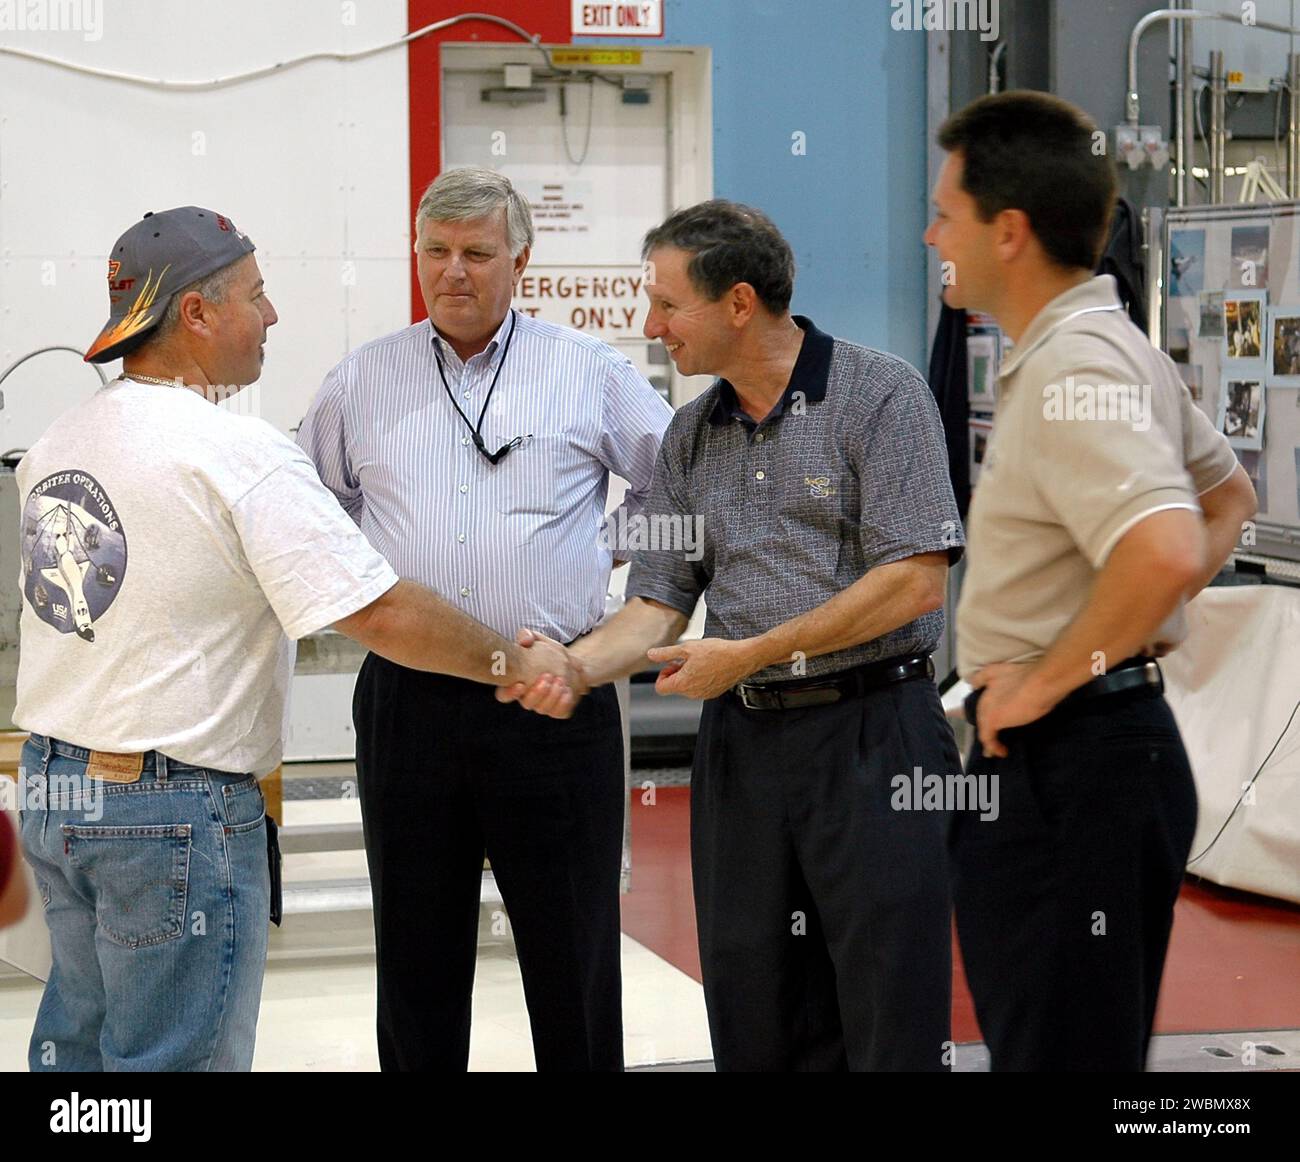 KENNEDY SPACE CENTER, FLA. - Michael Griffin, administrator of the National Aeronautics and Space Administration (NASA), shakes hands with United Space Alliance advanced systems technician Richard Van Wart during a tour of Orbiter Processing Facility bay 1. From left are Van Wart, Center Director James Kennedy, Griffin and Space Shuttle Atlantis vehicle manager Scott Thurston. Space Shuttle Atlantis is being processed for the second Return to Flight mission, STS-121, in the facility. This is Griffin's first official visit to Kennedy Space Center. Griffin is the 11th administrator of NASA, a ro Stock Photo